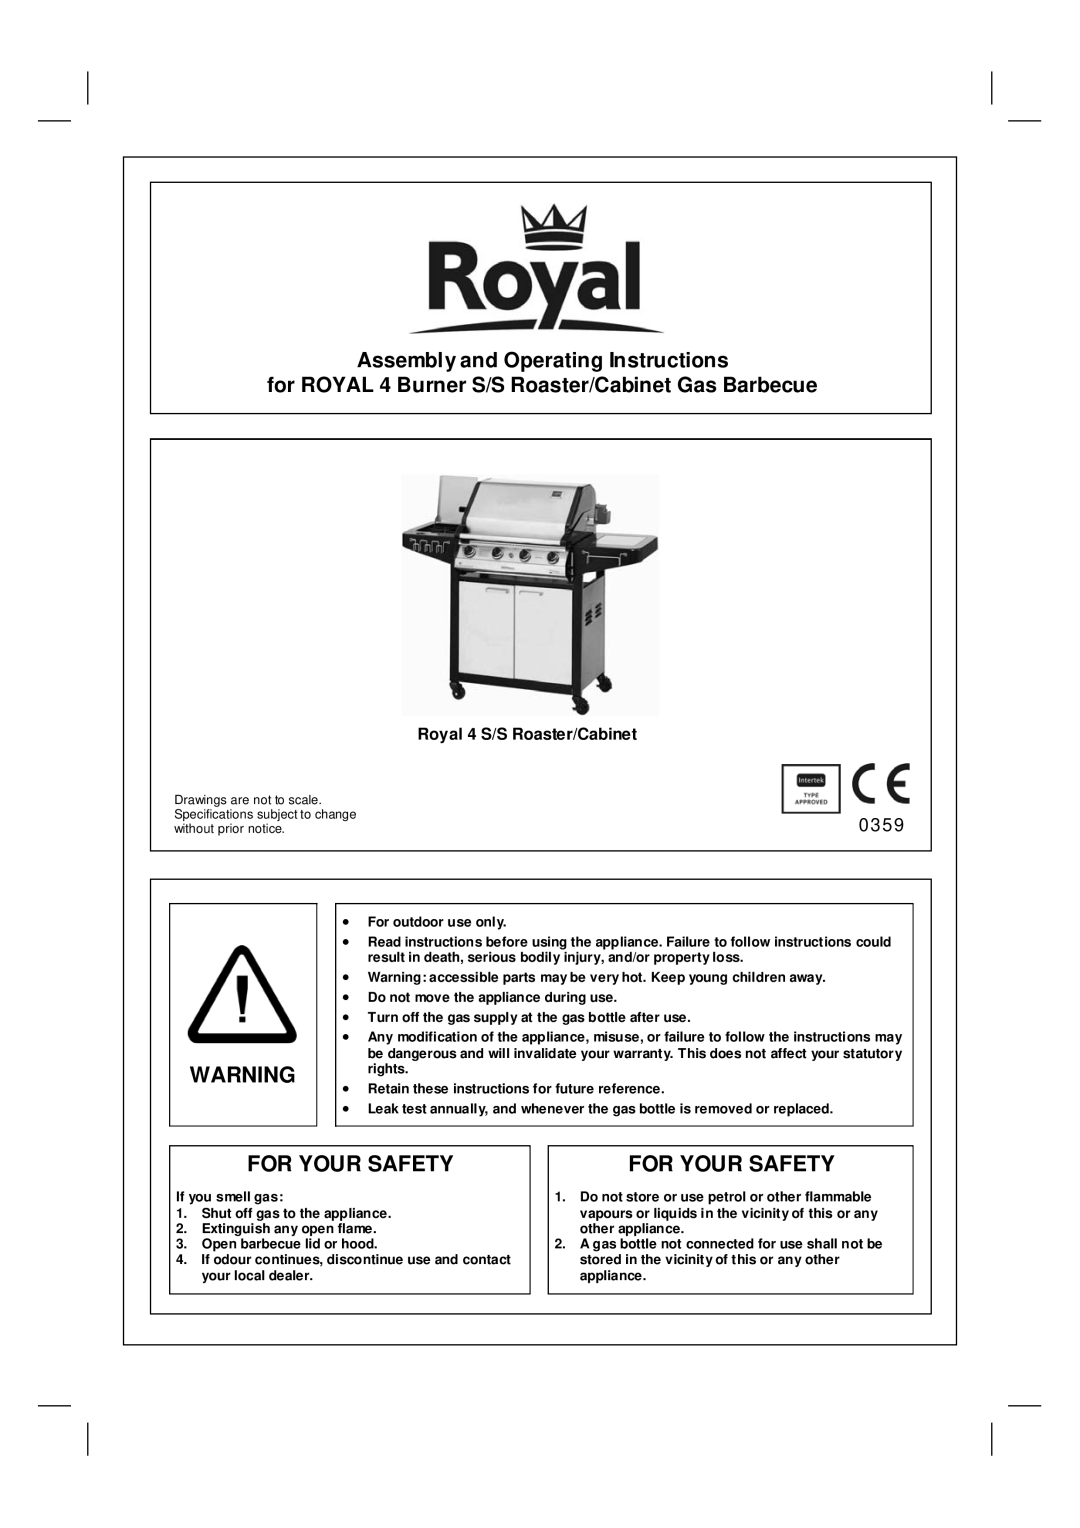 Royal Leisure warranty For Your Safety, 0359, Assembly and Operating Instructions, Royal 4 S/S Roaster/Cabinet 